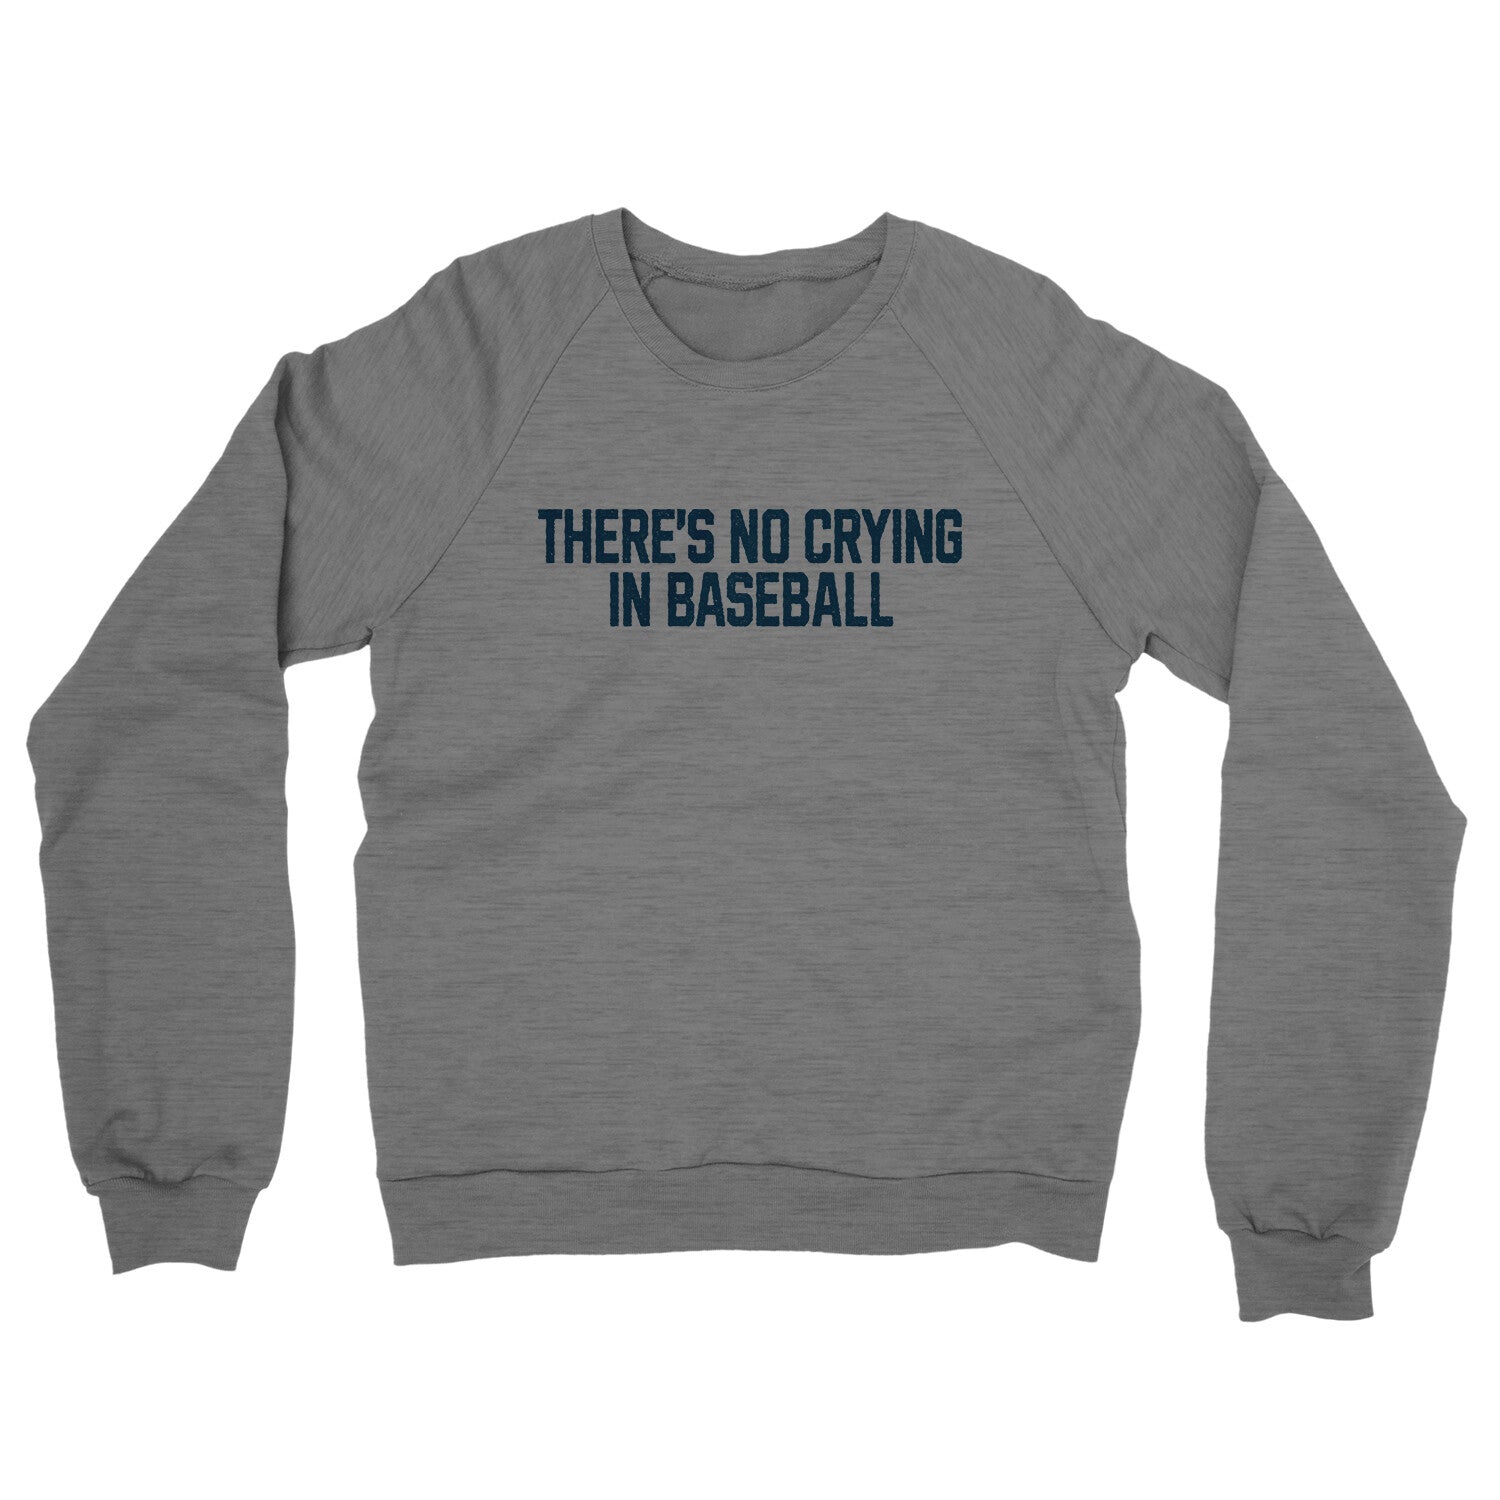 There's No Crying in Baseball in Graphite Heather Color